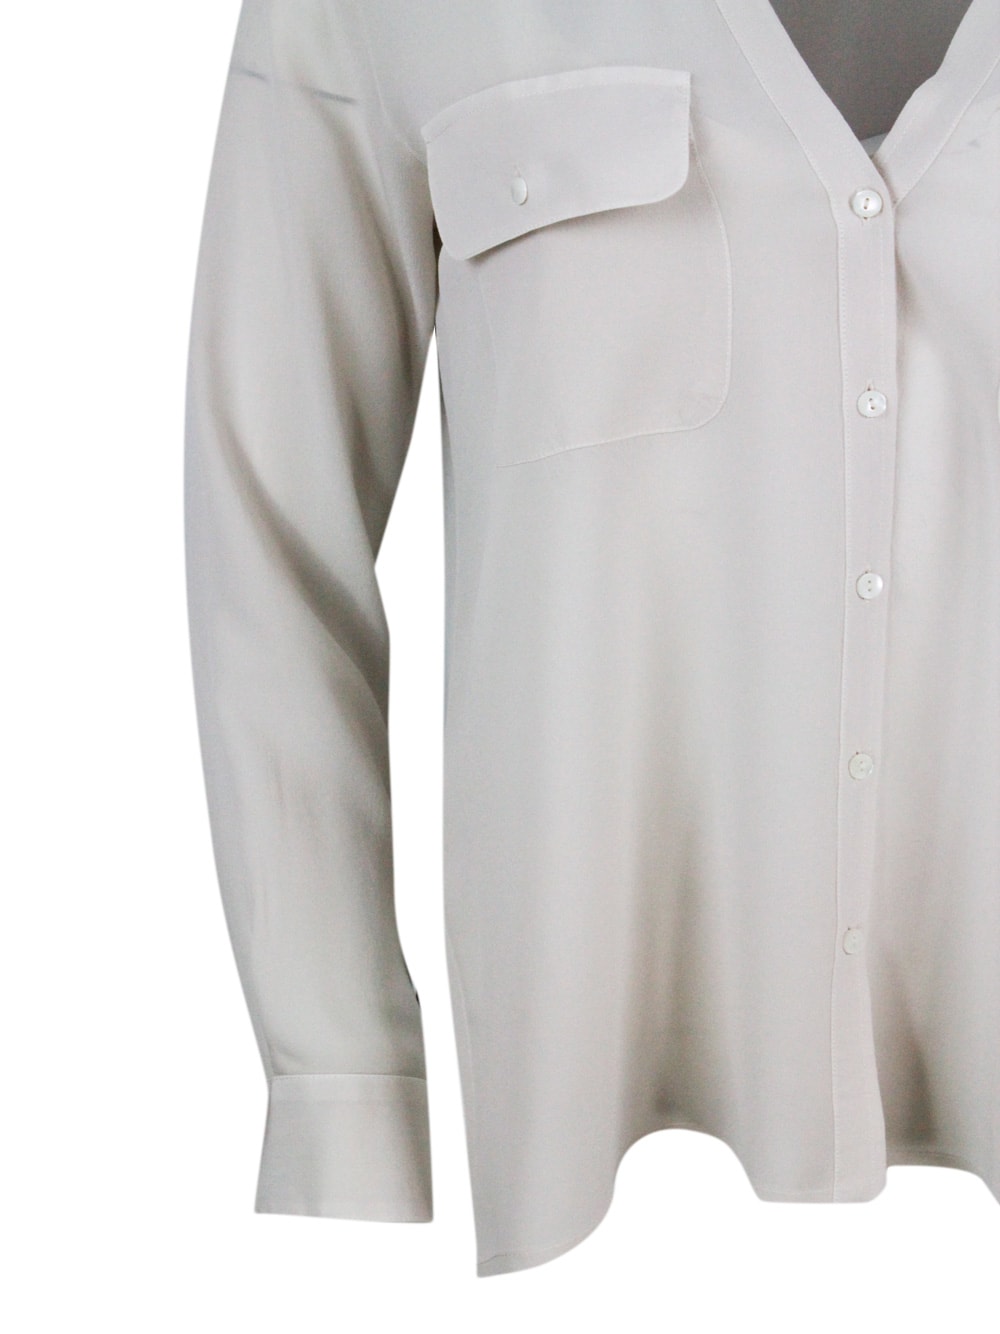 Shop Antonelli Shirt Made Of Soft Stretch Silk, With V-neck, Chest Pockets And Button Closure In Beige